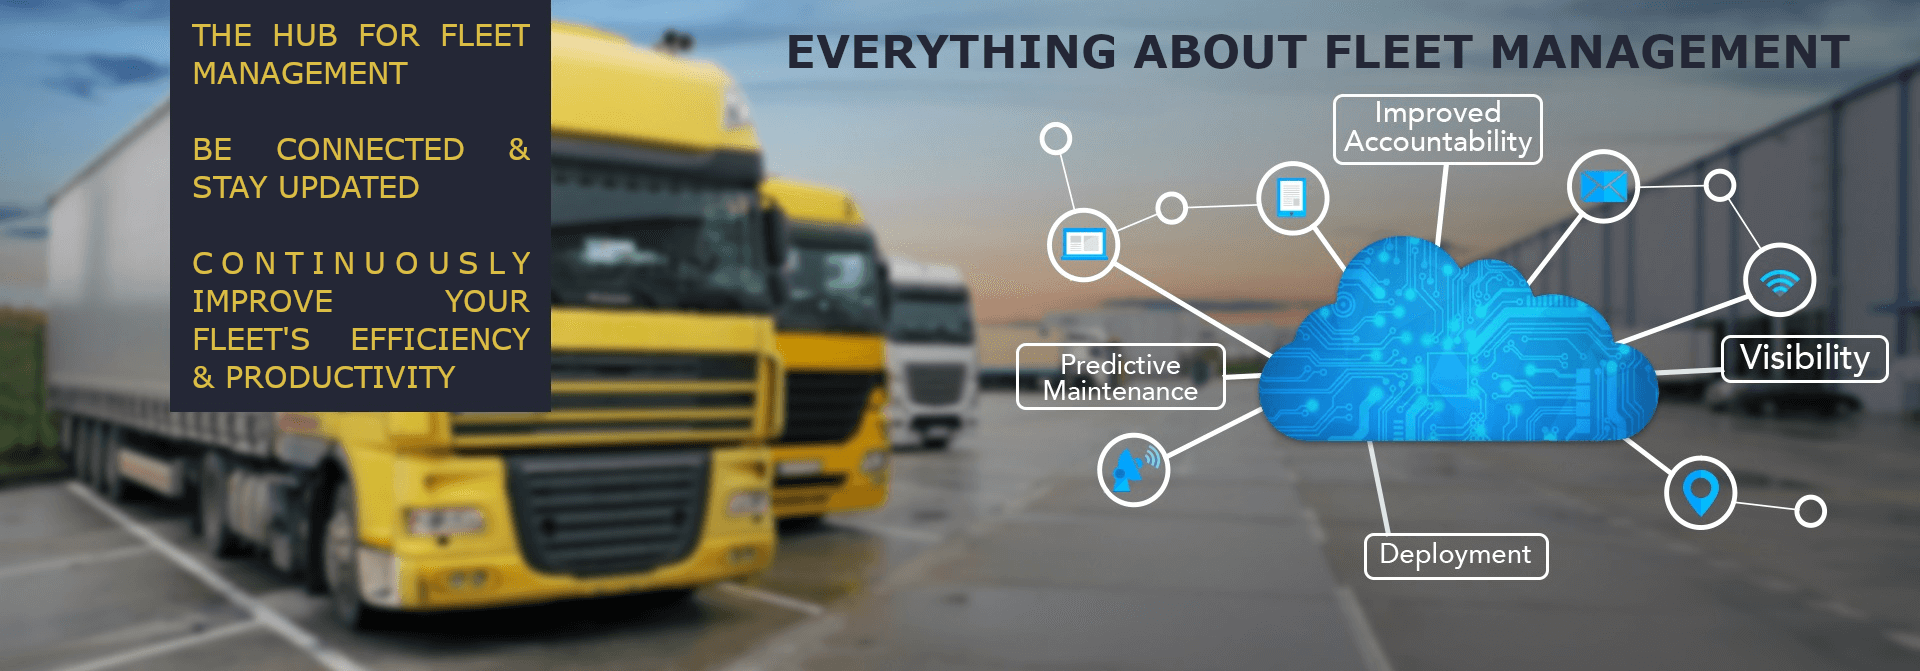 Everything about fleet management